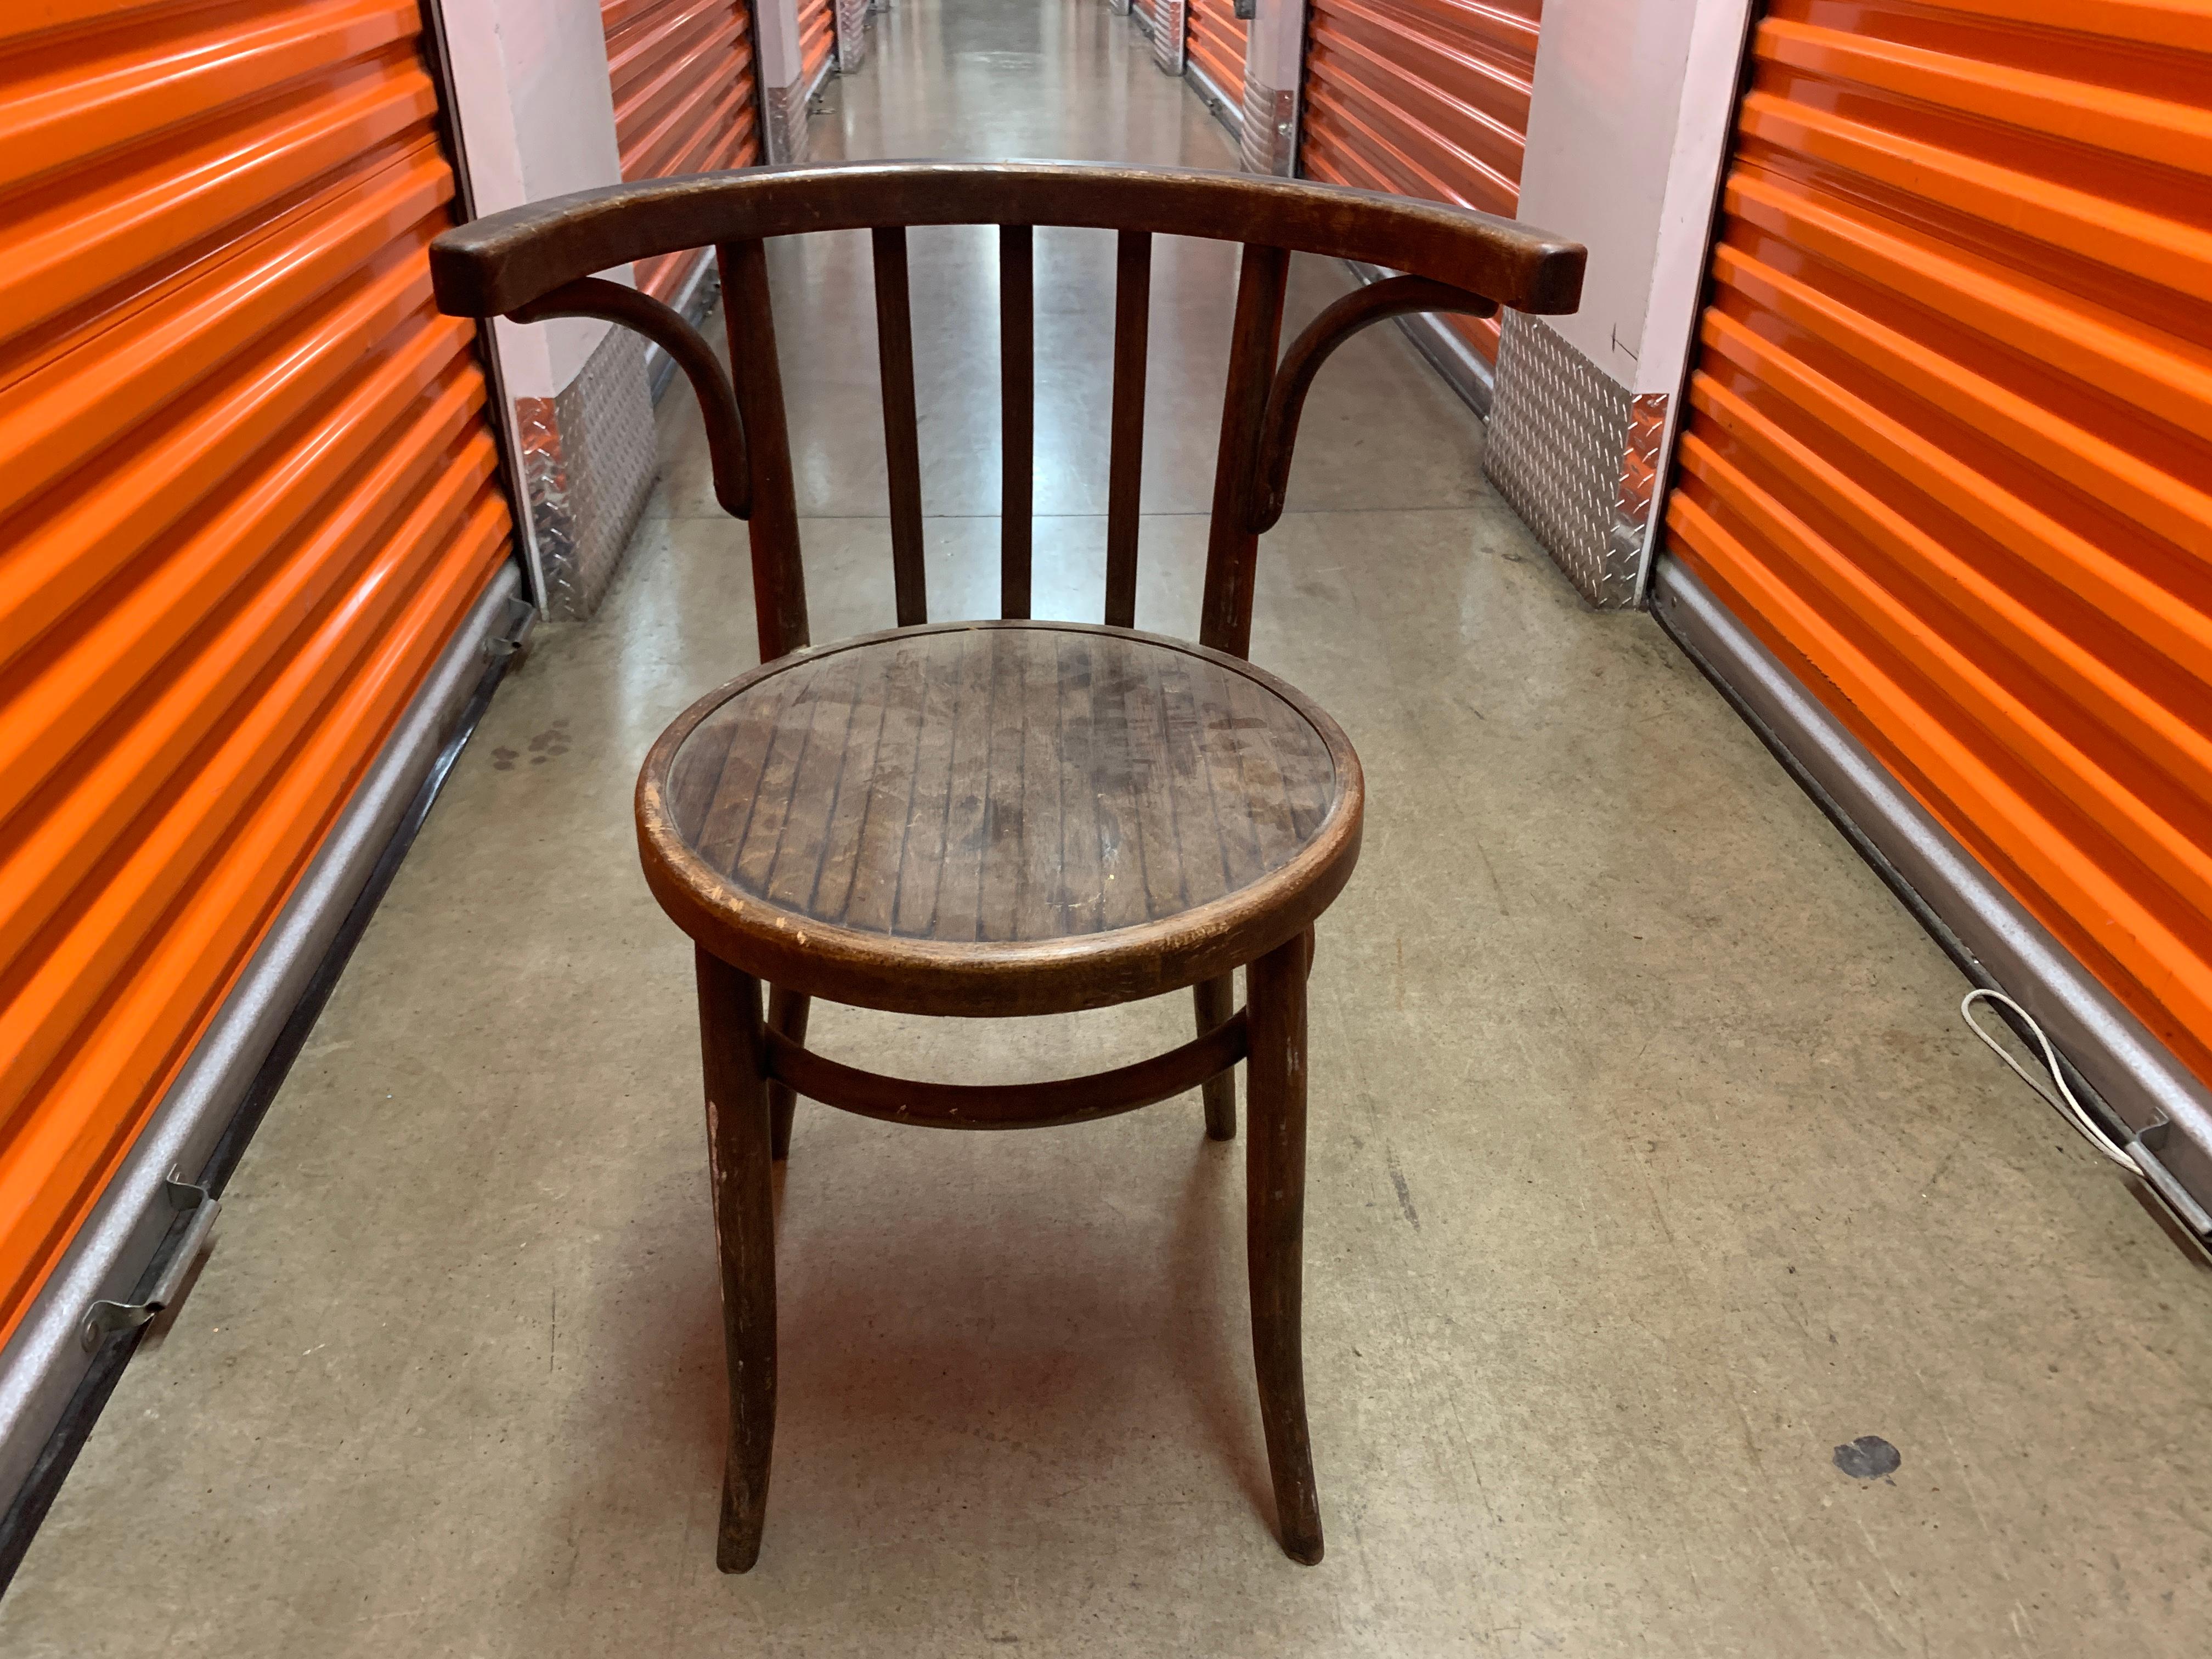 A complimentary pair of vintage horseshoe dining chairs. Rich dark oakwood with beautiful wood grain with a comfortable rounded back to hug while you seat and entertain.

The measurements for the chairs vary, for they are not an